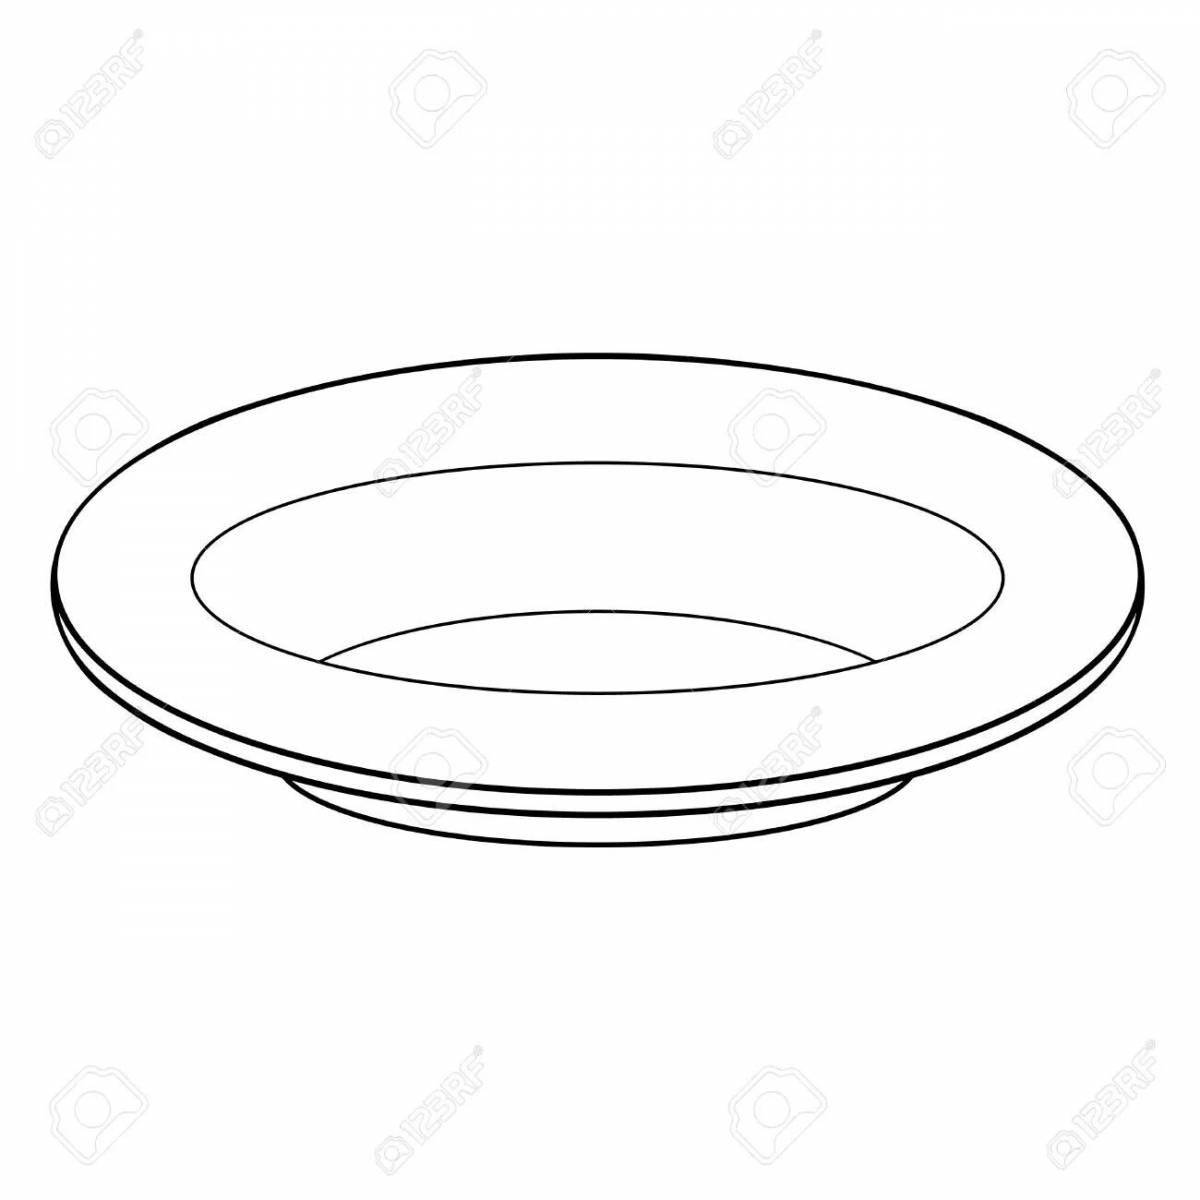 Coloring book funny soup plate